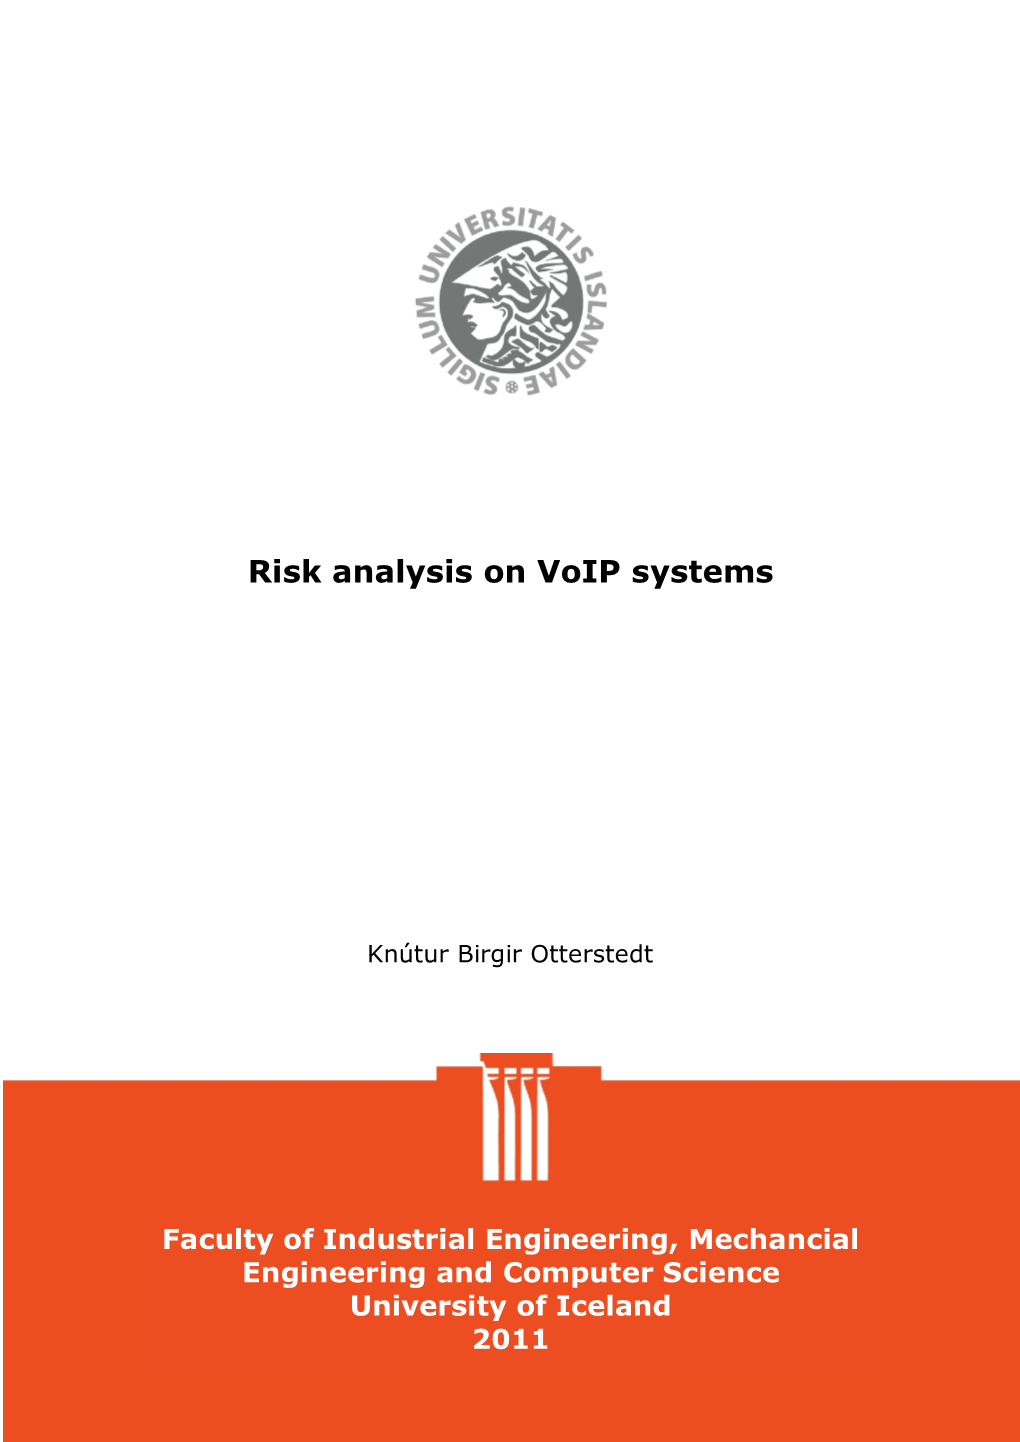 Risk Analysis on Voip Systems